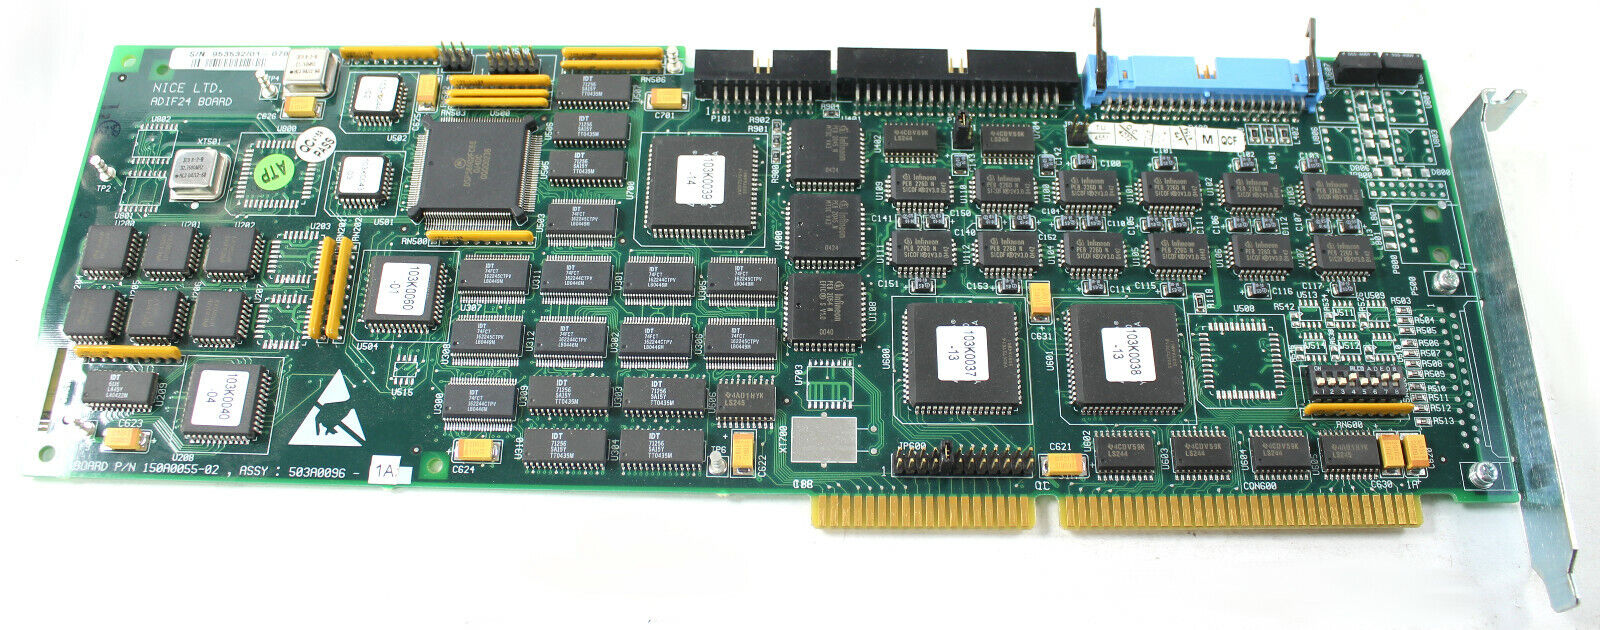 NICE SYSTEMS ADIF24 BOARD ASSY 150A0055-02